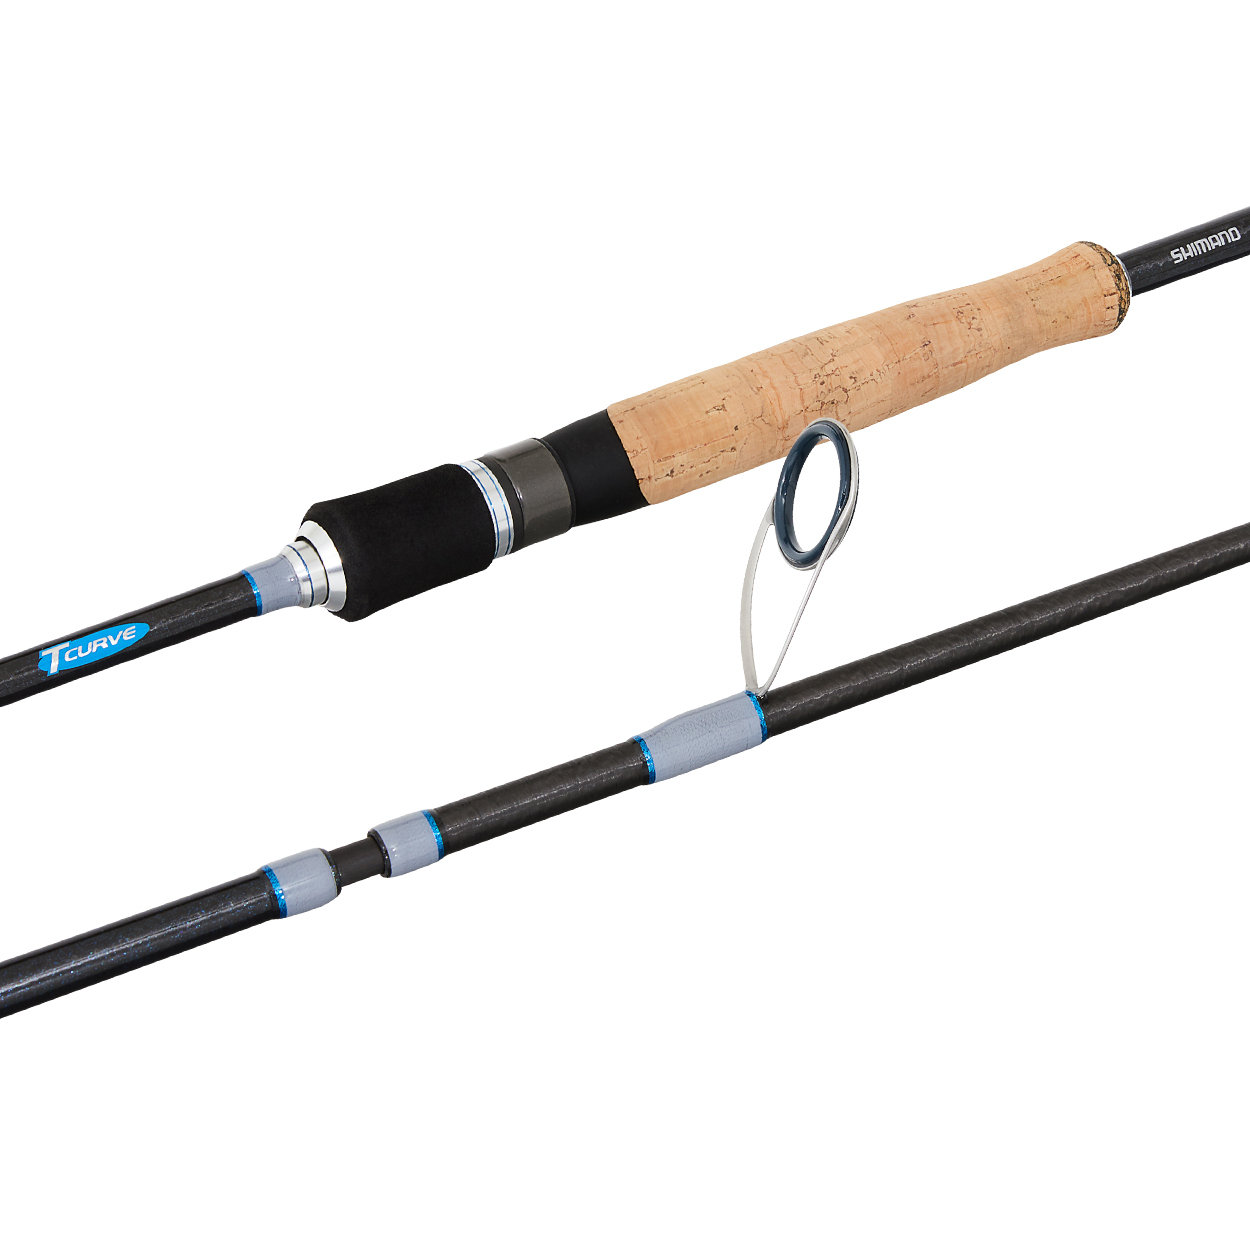 Discover Promotions Shimano Tcurve Baitcast Fishing Rod of high quality for  All the people